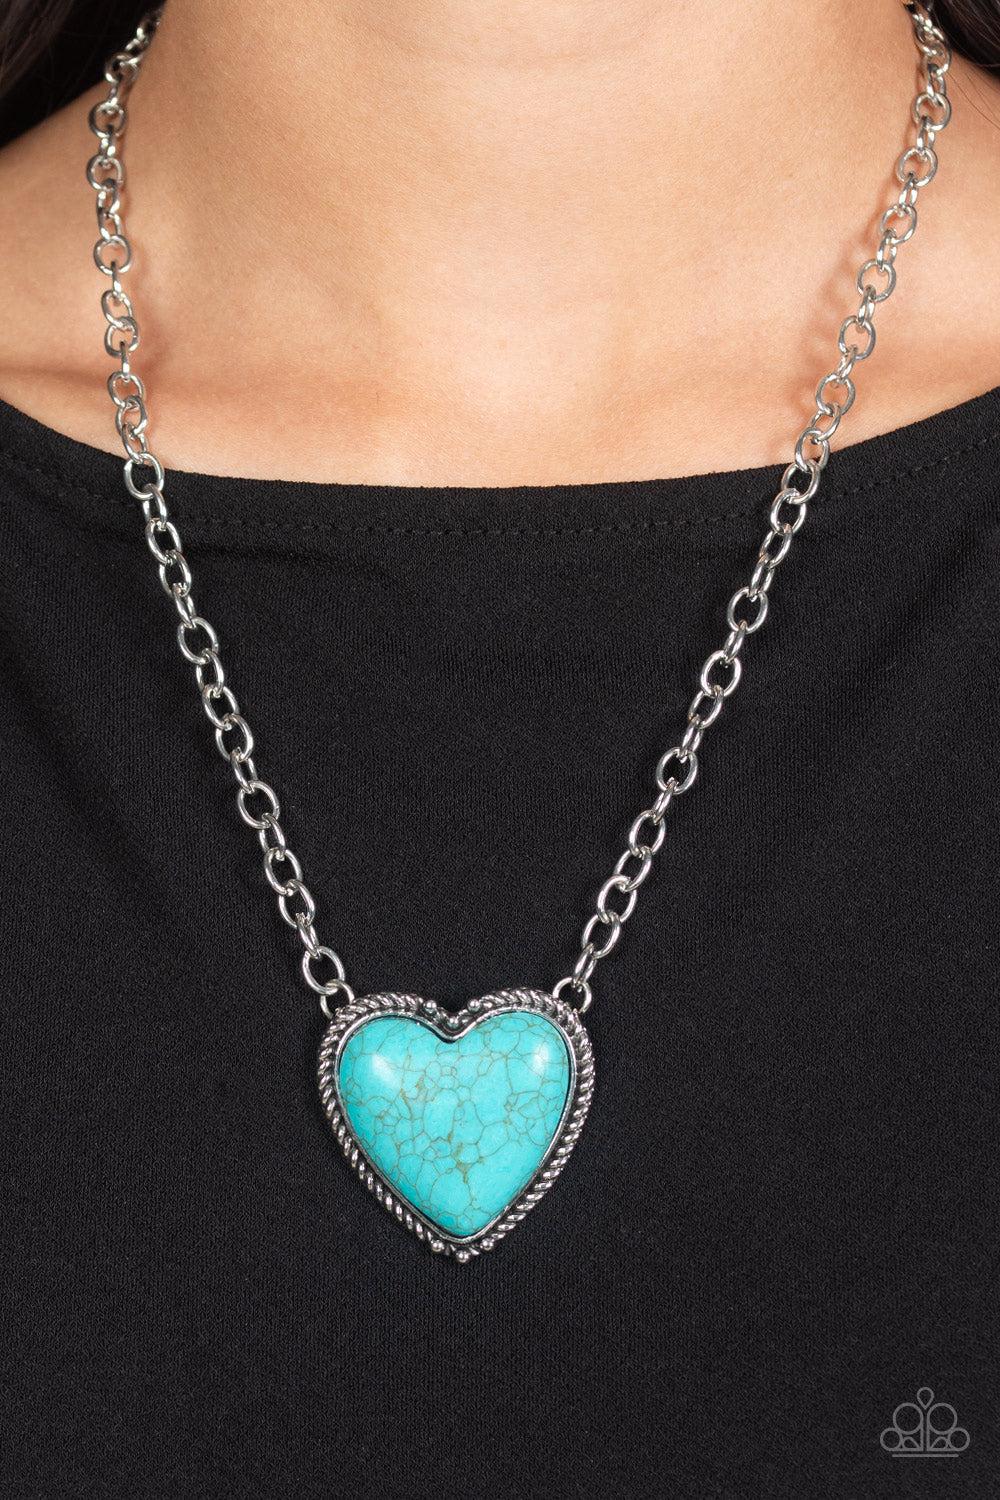 Authentic Admirer Turquoise Blue Stone Heart Necklace - Paparazzi Accessories-on model - CarasShop.com - $5 Jewelry by Cara Jewels